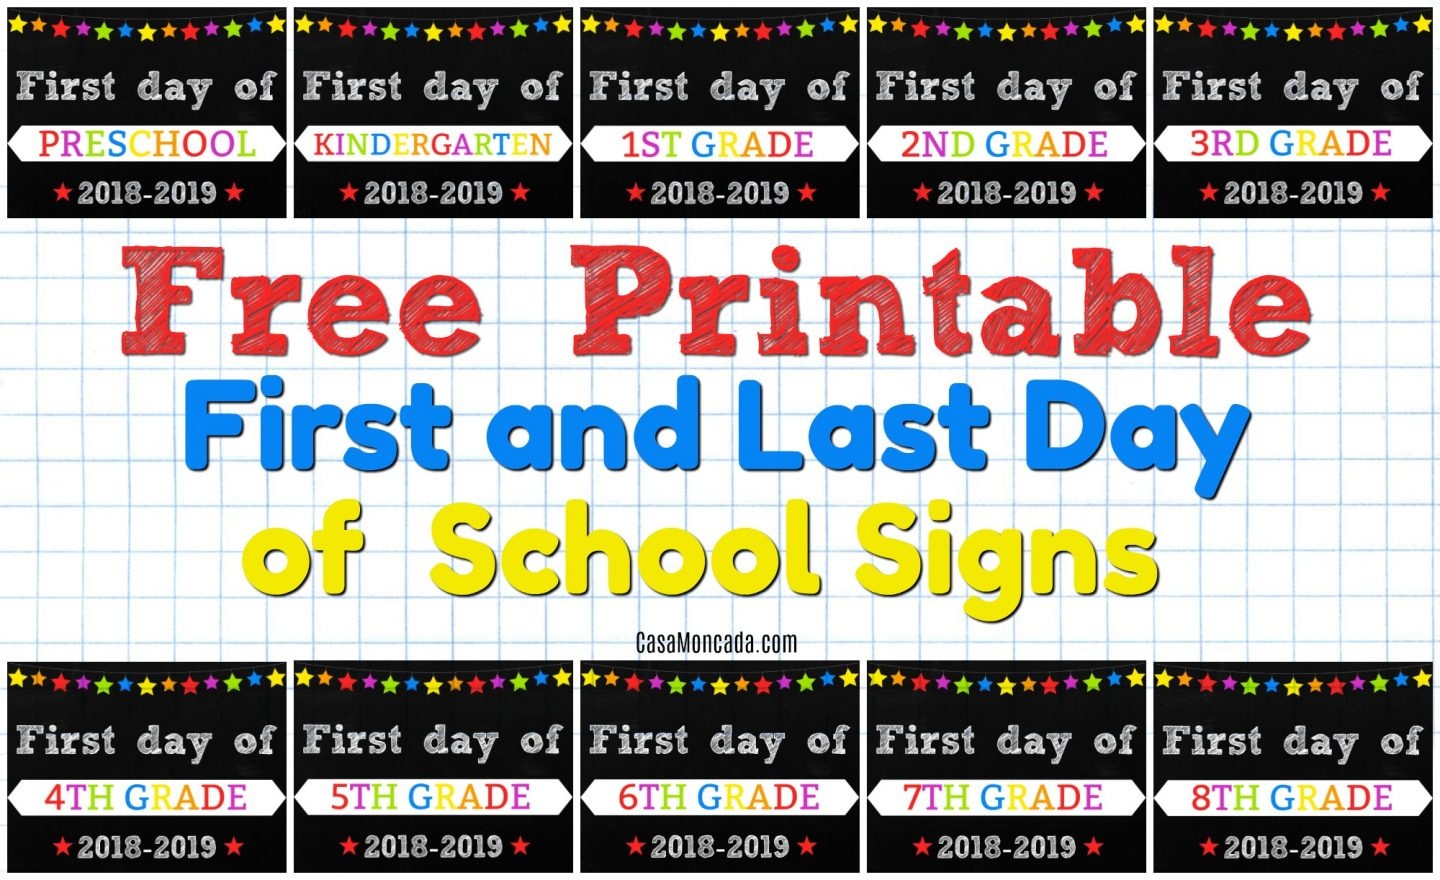 Free Printable First And Last Day Of School Signs - Casa Moncada - Free Printable First Day Of School Signs 2017